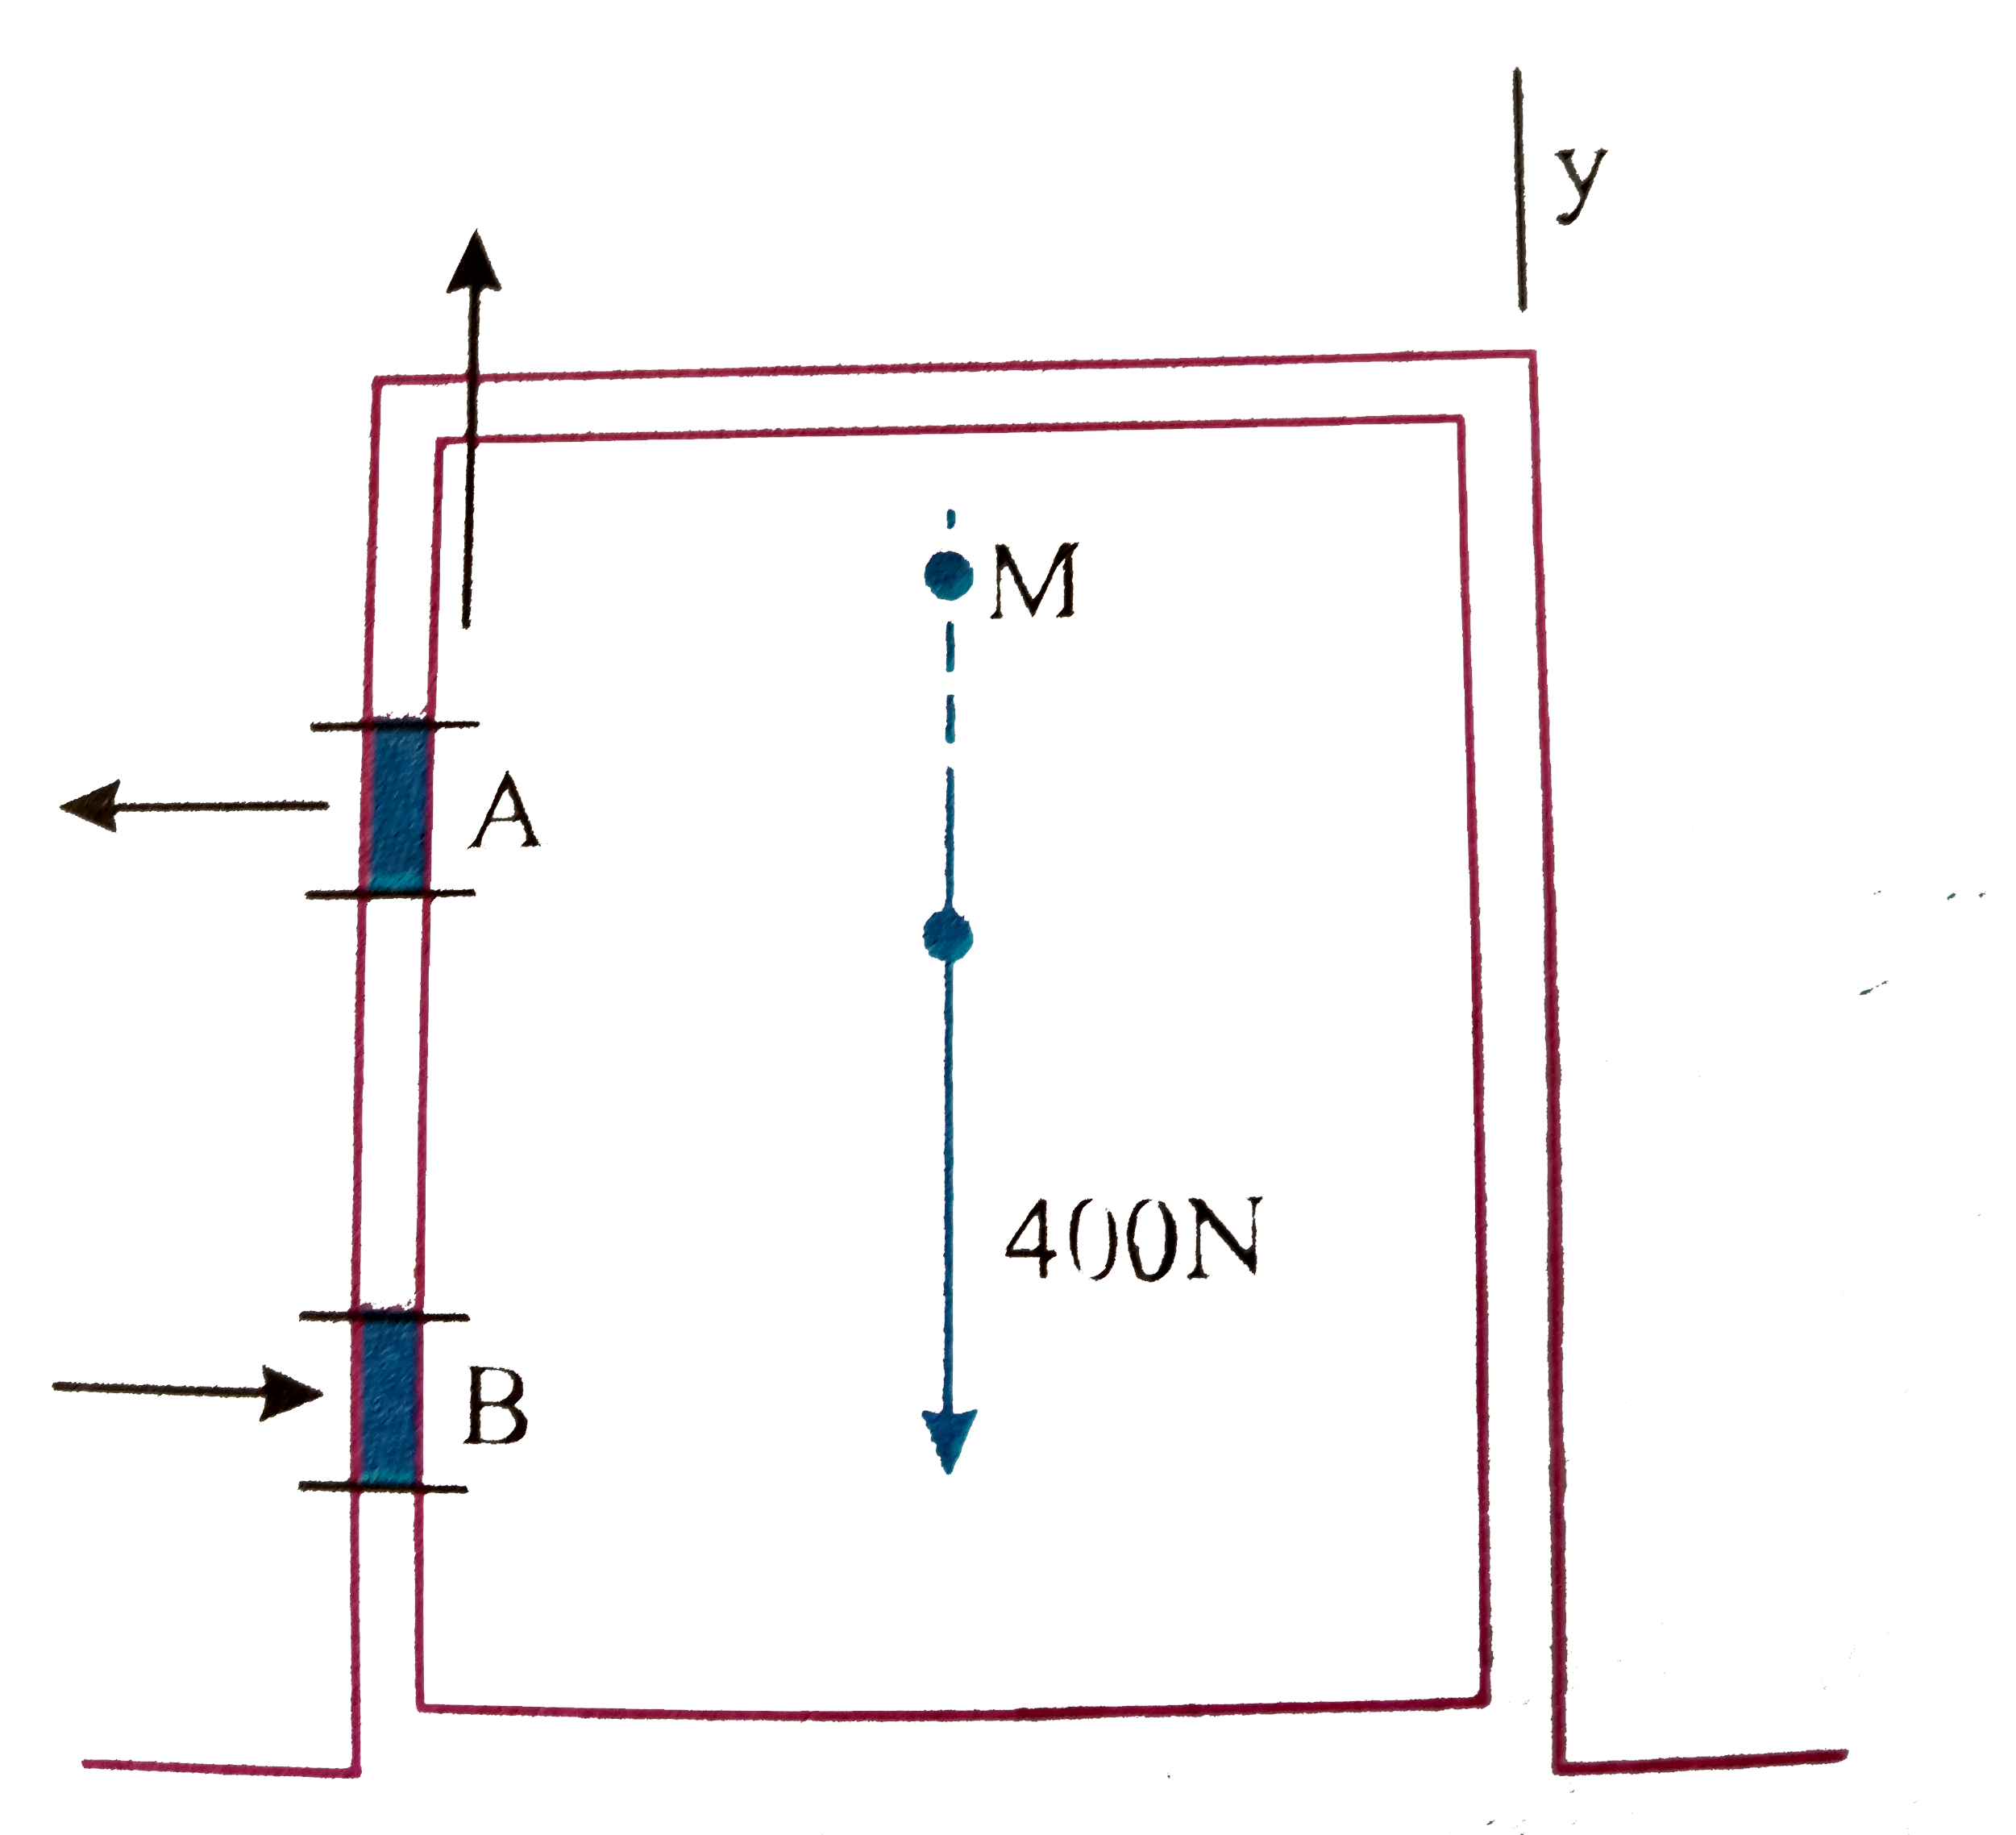 As shown in figure, the hinges A and B hold a uniform 400N door in place. The upper hinge supports the entire weight of the door. Find the resultant force exerted on the door at the hinges, the width of the door is h/2, where h is the distance between the hinges.